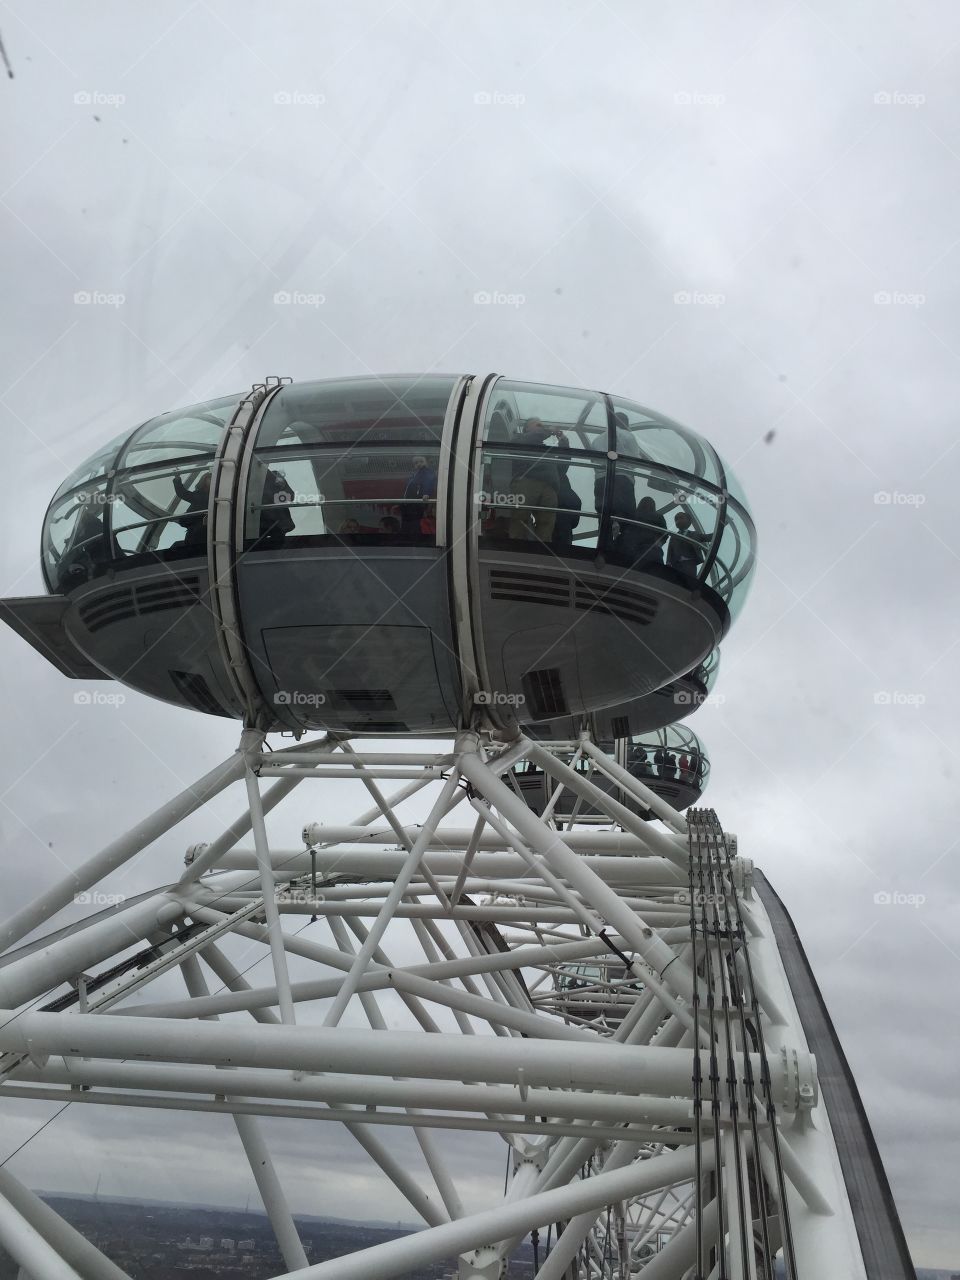 Looking at life from a different point of view- London Eye, 2015